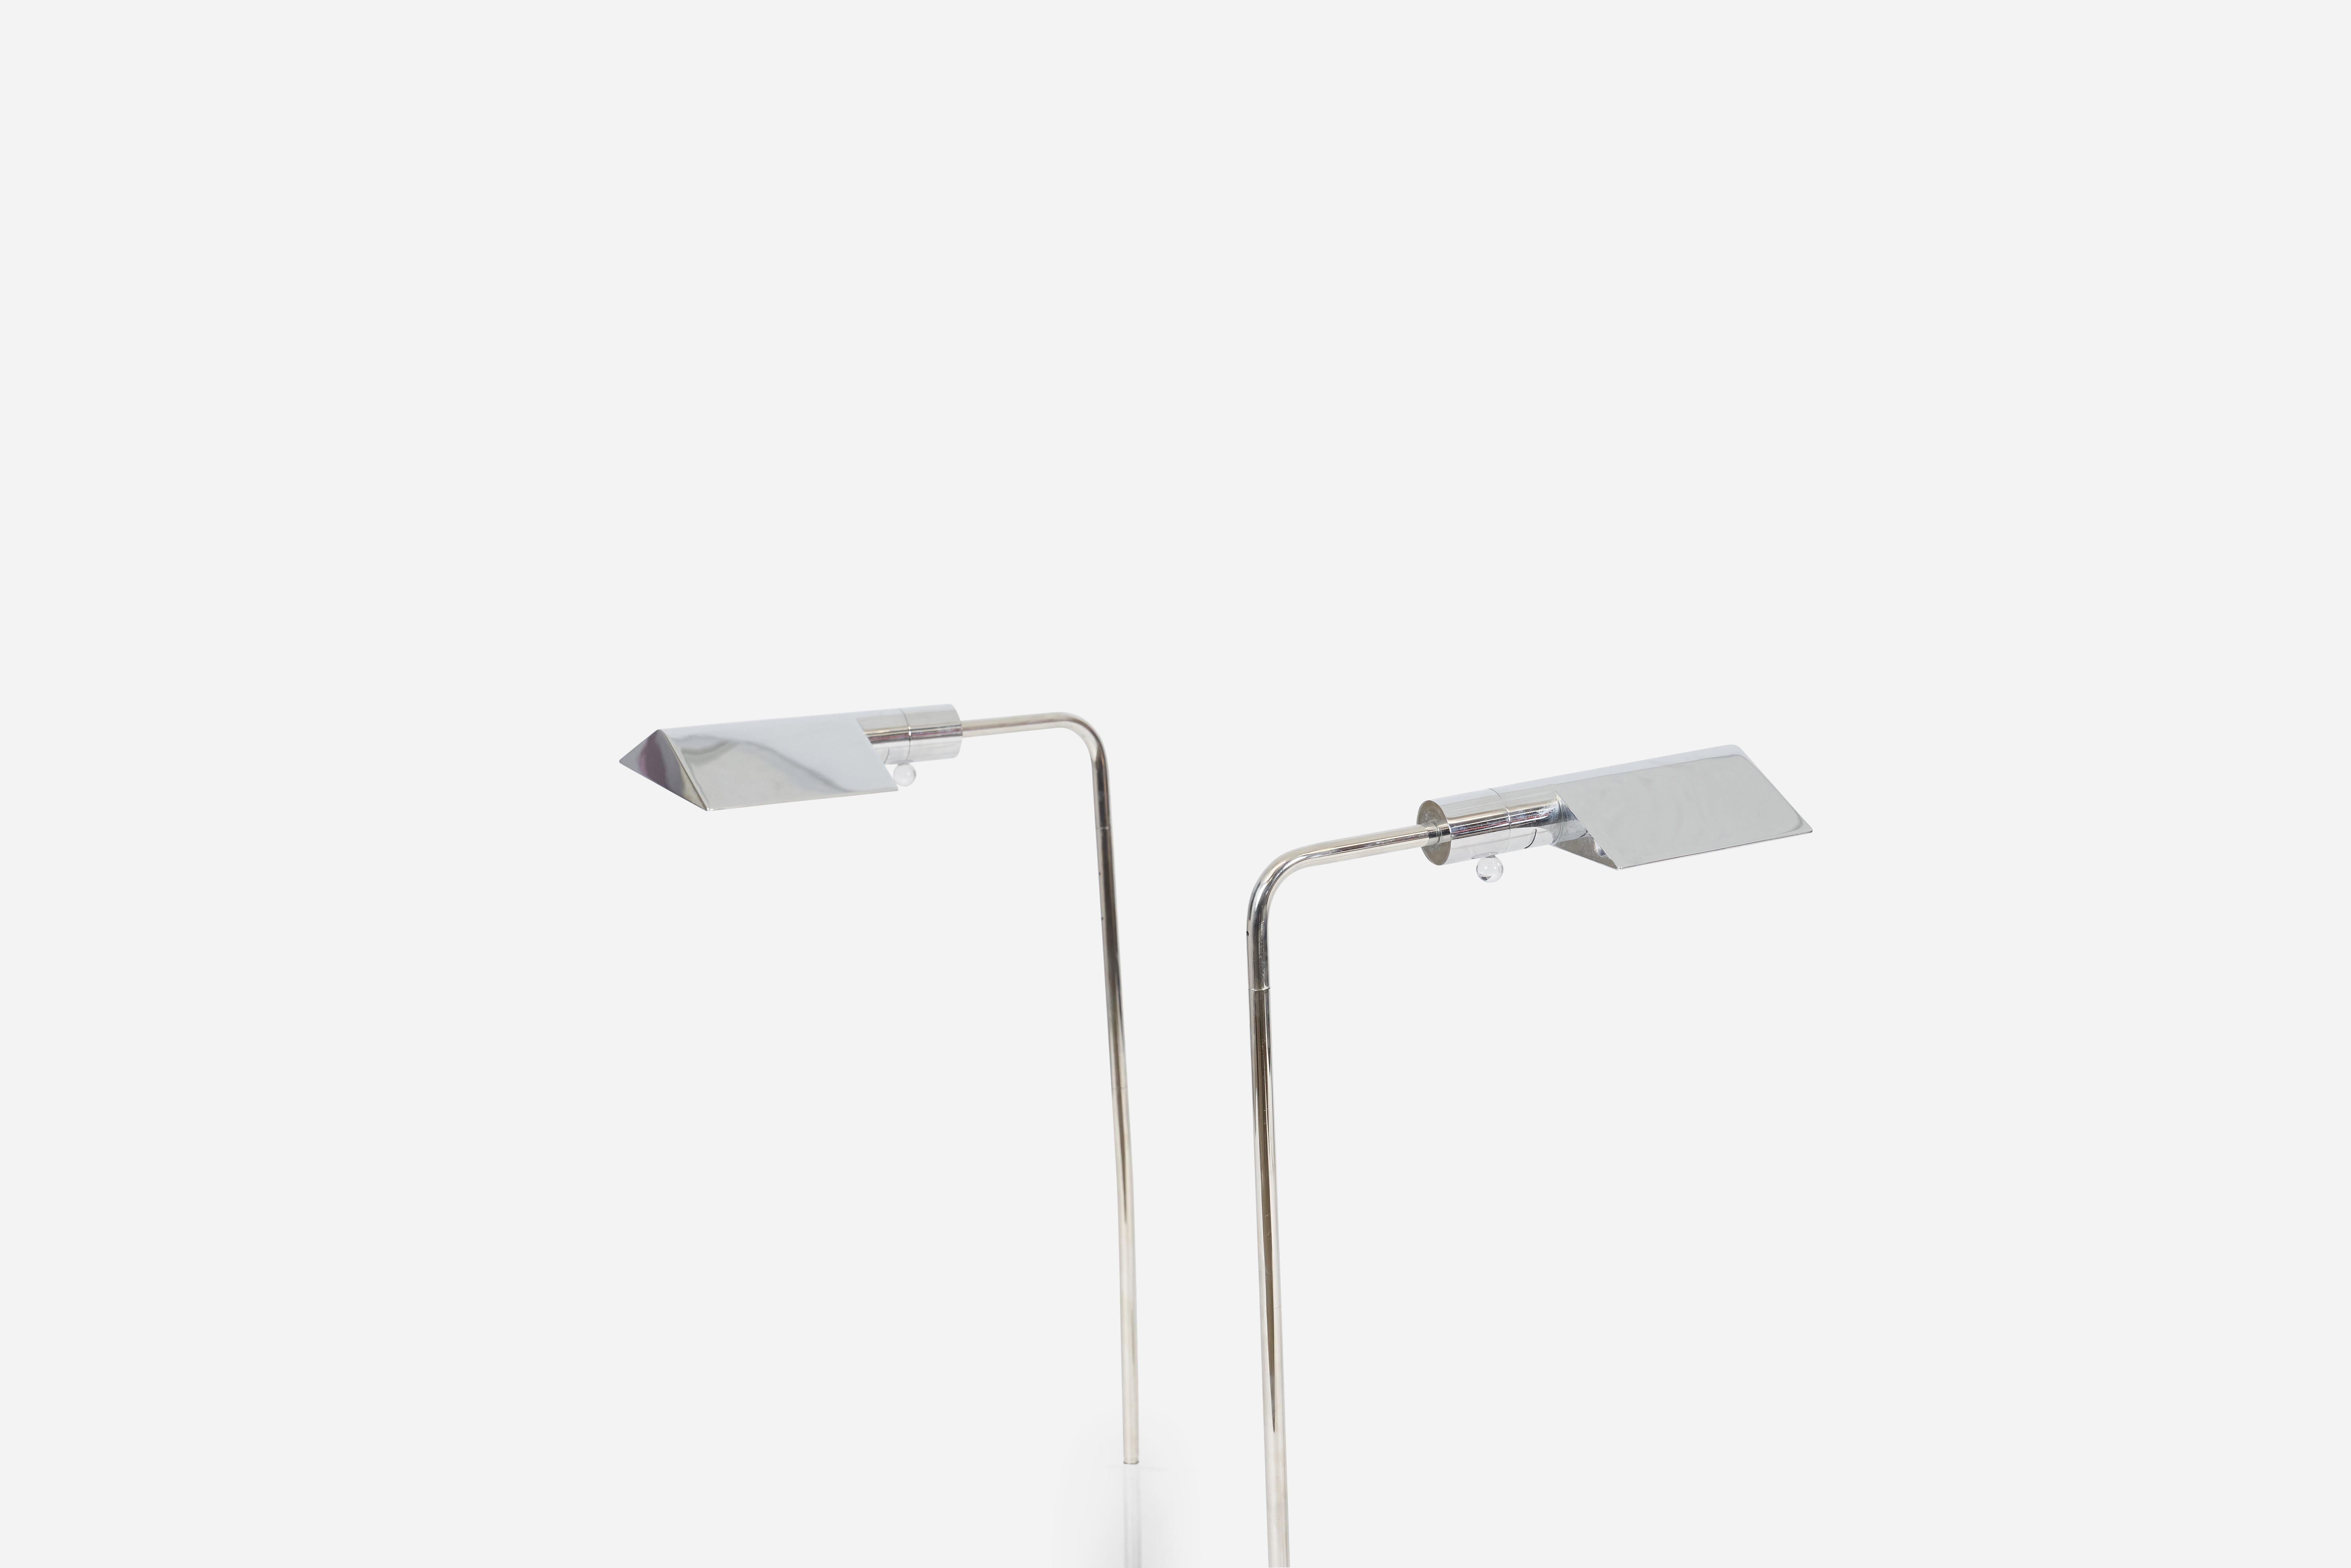 Pair of stainless steel floor lamps by Cedric Hartman. Lamps are fully adjustable in height and shade direction. Signed to underside 